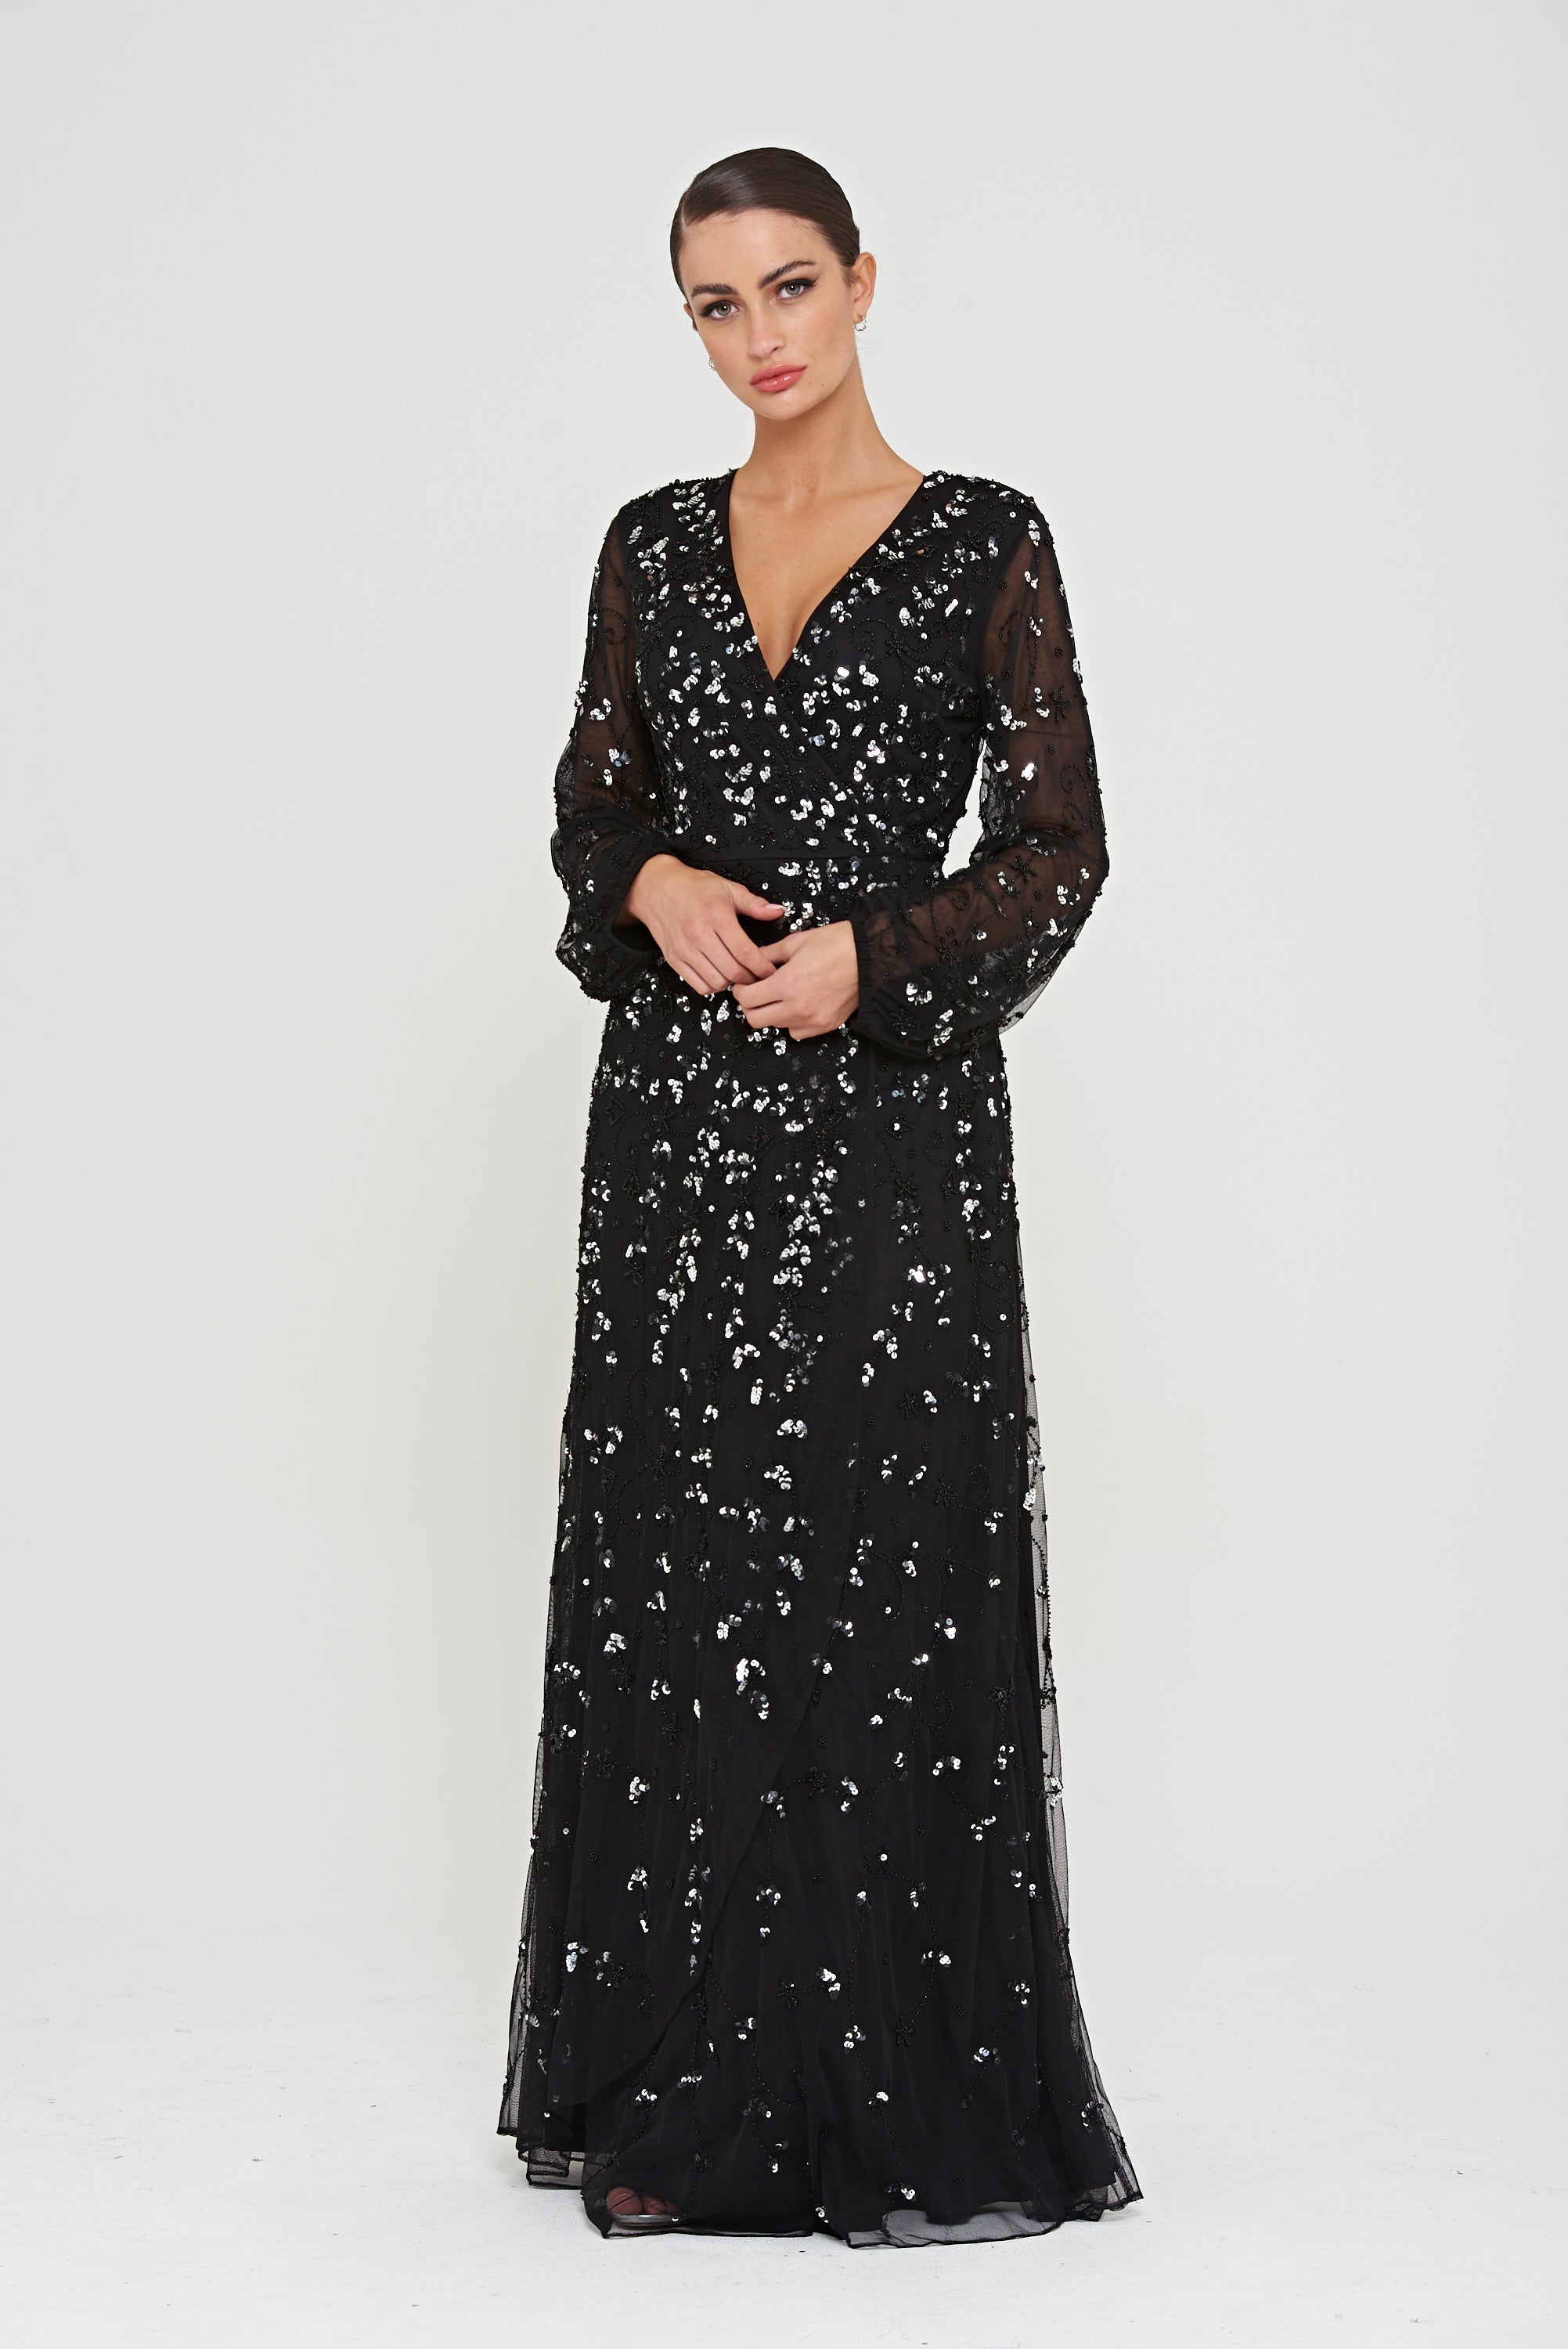 Eleanor Wrap Front Embellished Maxi Dress – Frock and Frill